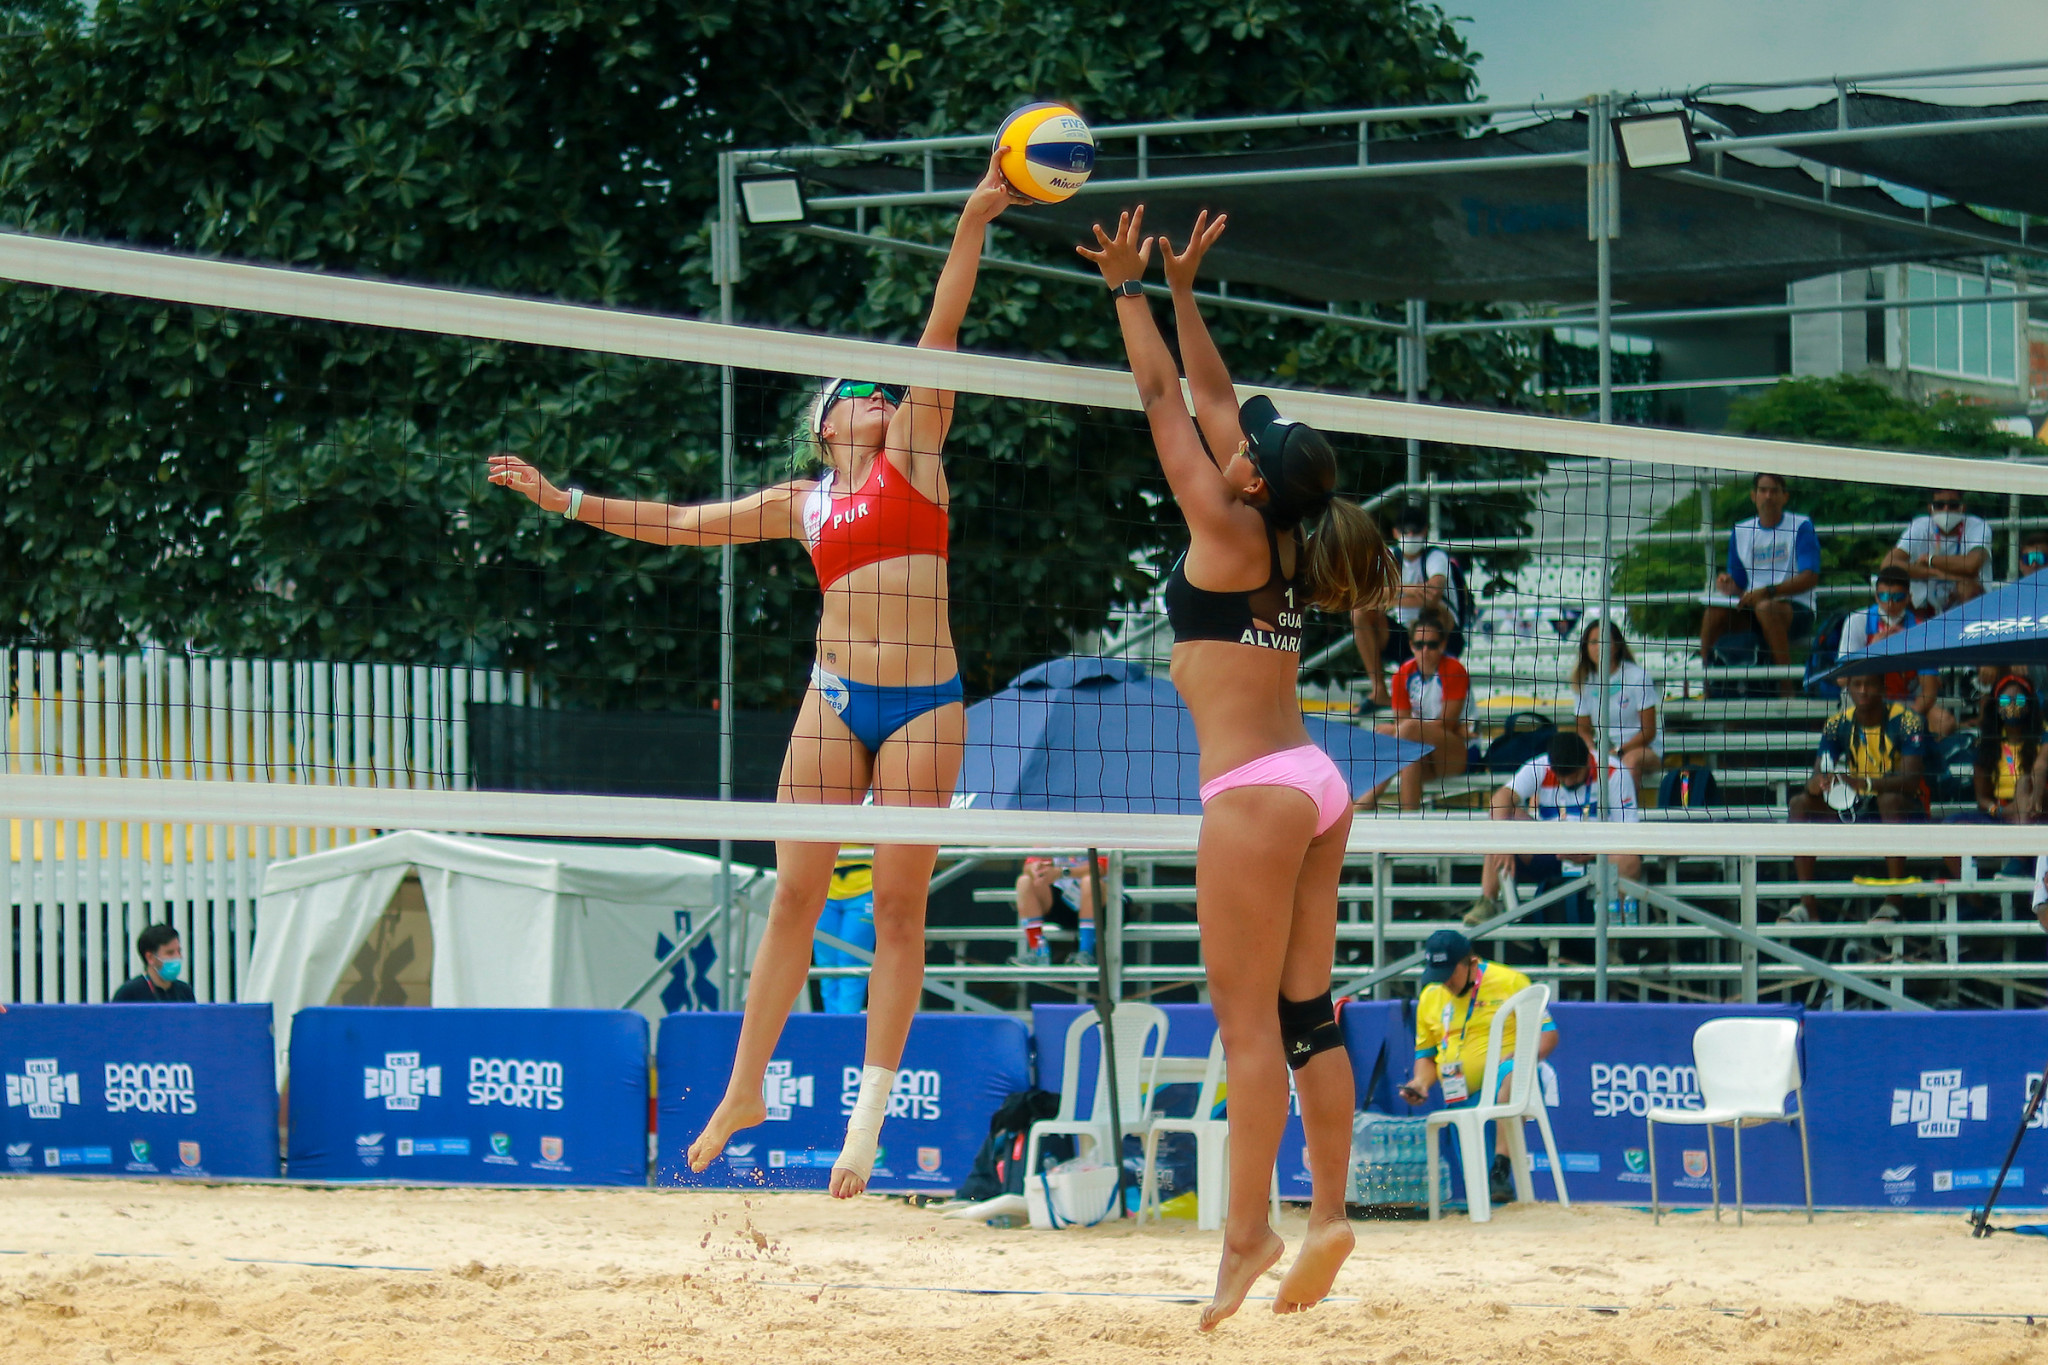 Maria Gonzalez, left, helped Puerto Rico to reach the women's beach volleyball final ©Agencia.Xpress Media